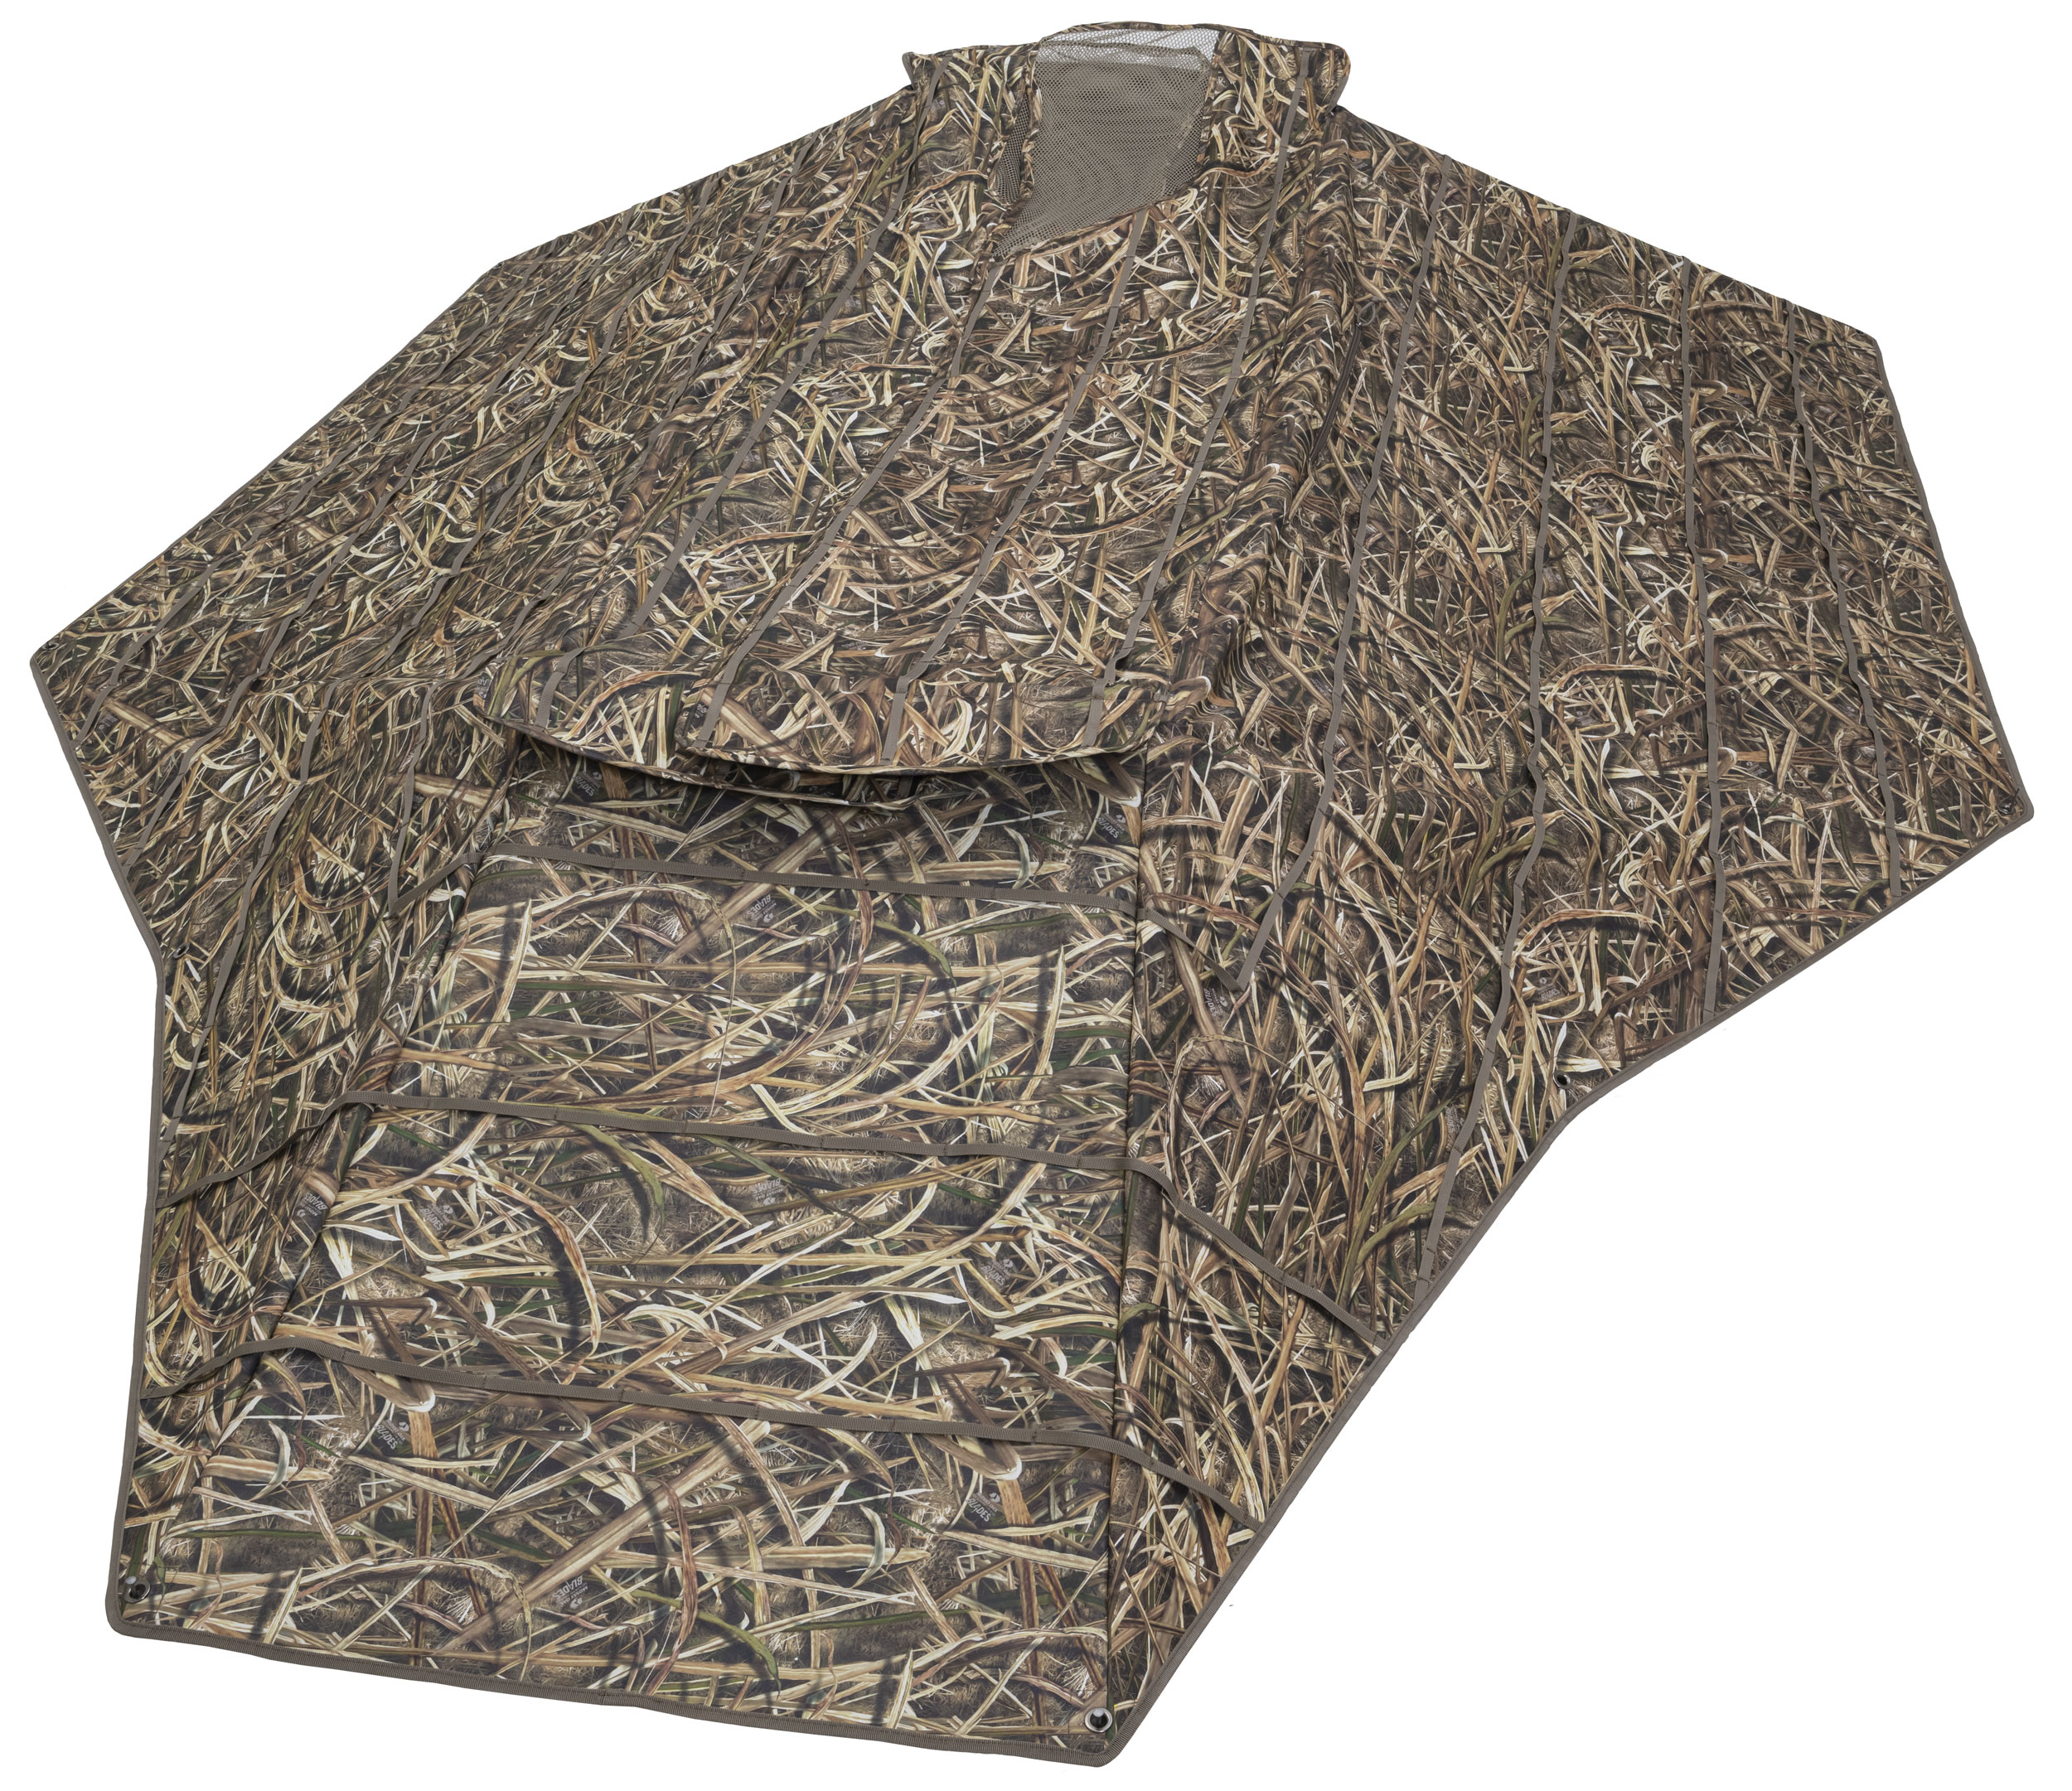 ALPS OutdoorZ Adds New Pattern to Zero Gravity Blind | Shoot On